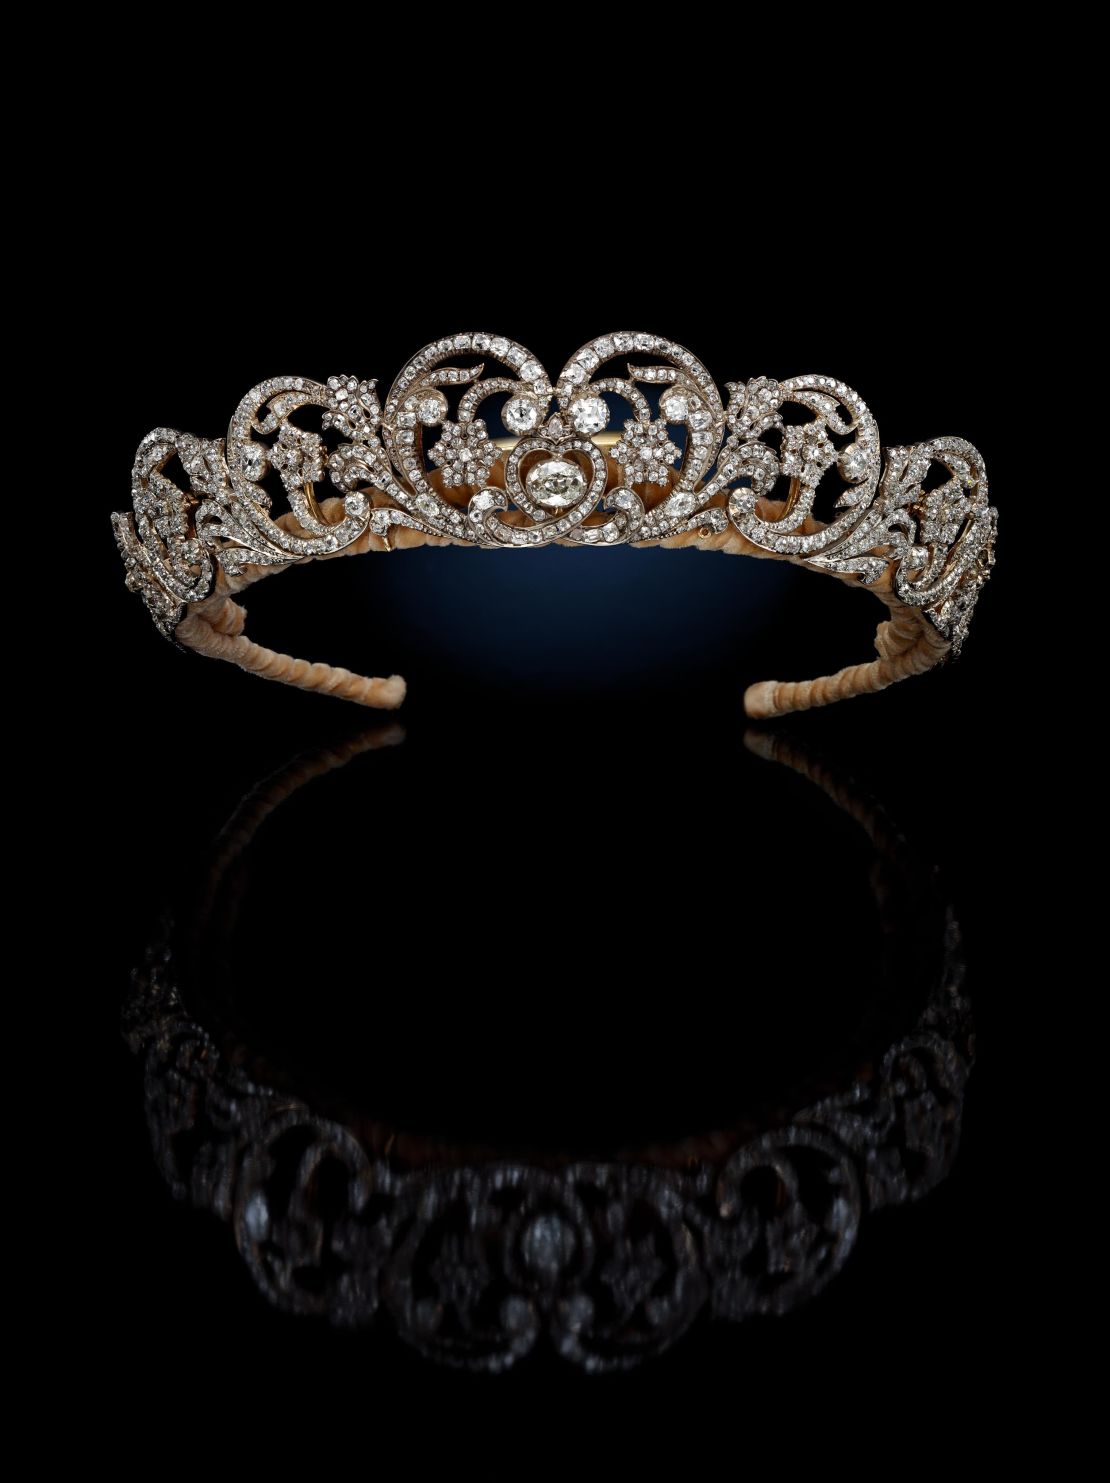 The Spencer Tiara, a Spencer family heirloom made royal after Princess Diana wore it on her wedding day in 1981.